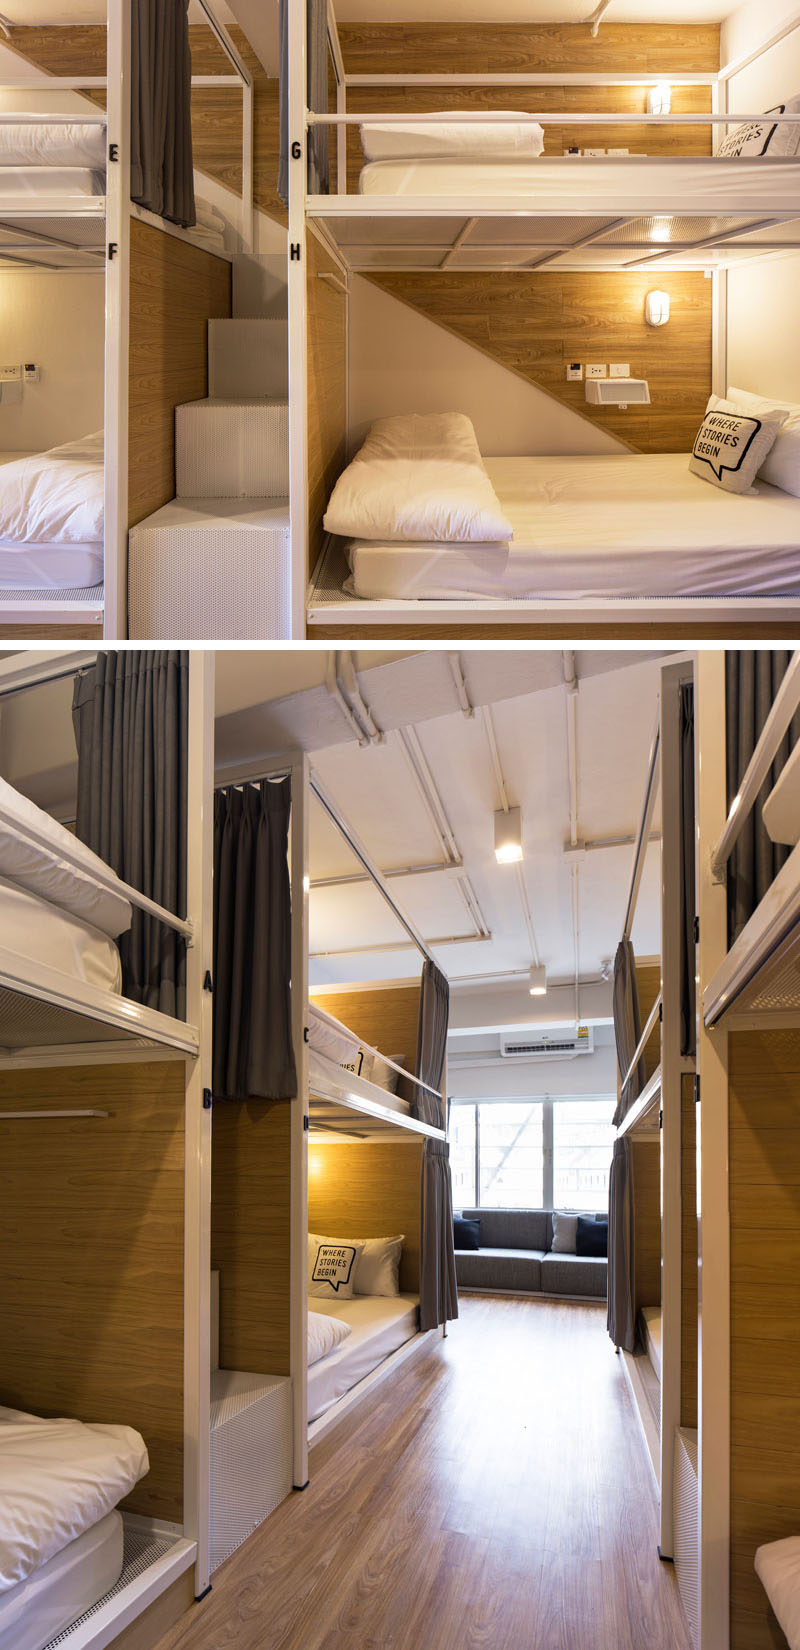 In this modern Bangkok hostel, the bunks have stairs between them instead of a ladder, allowing easy access to the top bunks.